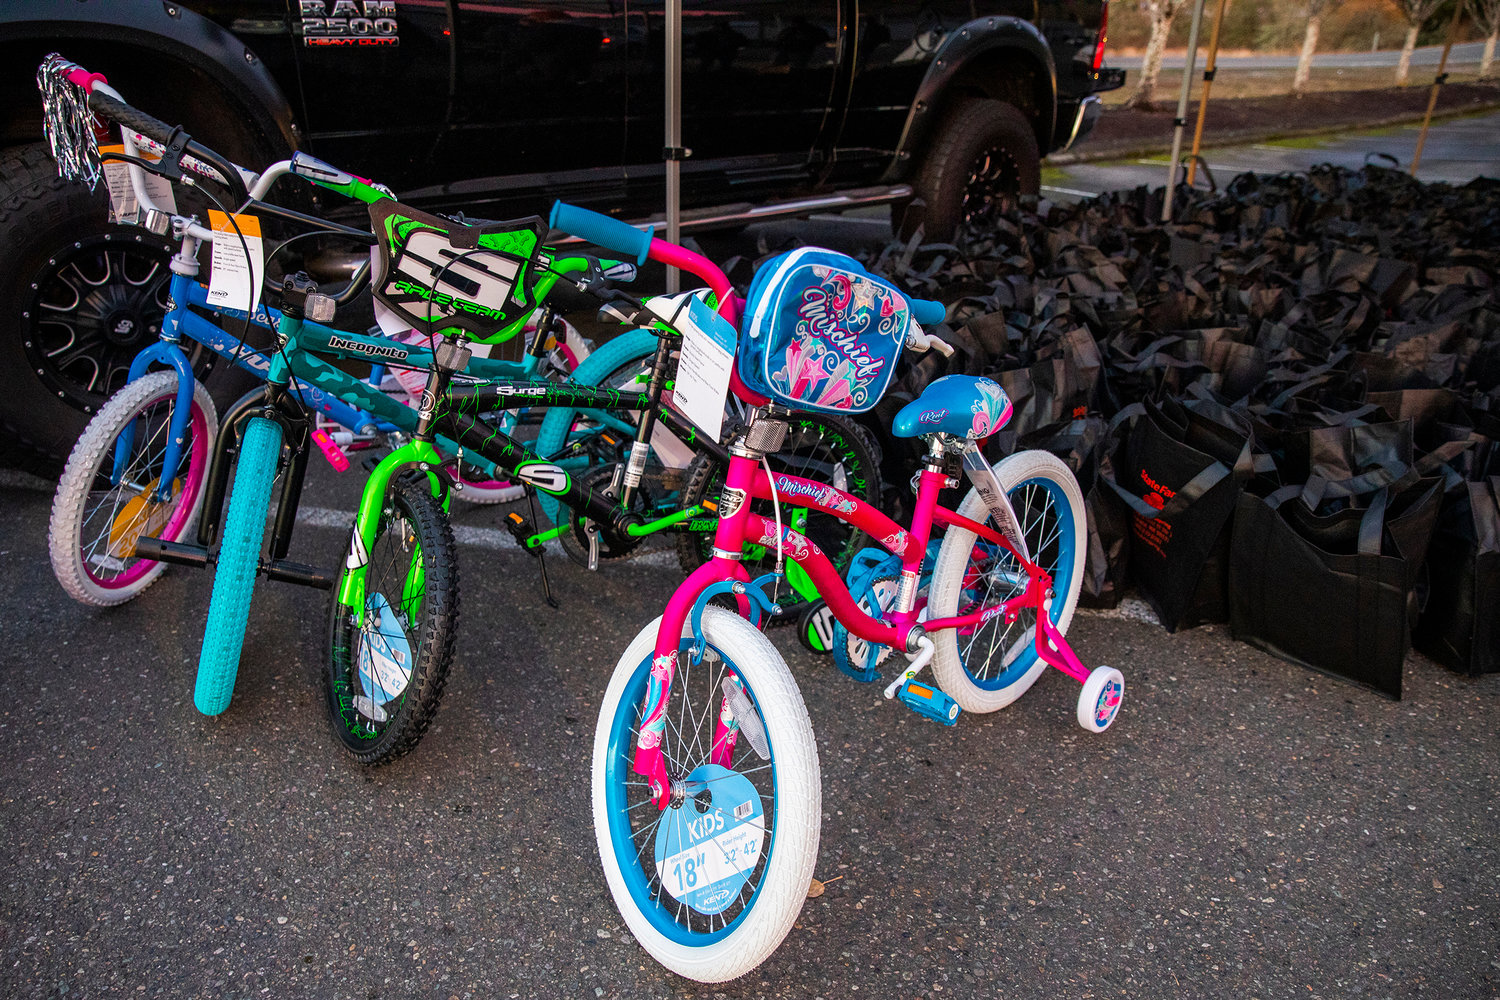 Four bikes sit on display for a “Choose Local Black Friday” giveaway hosted by the Centralia-Chehalis Chamber of Commerce Wednesday evening in the Lewis County Mall parking lot.